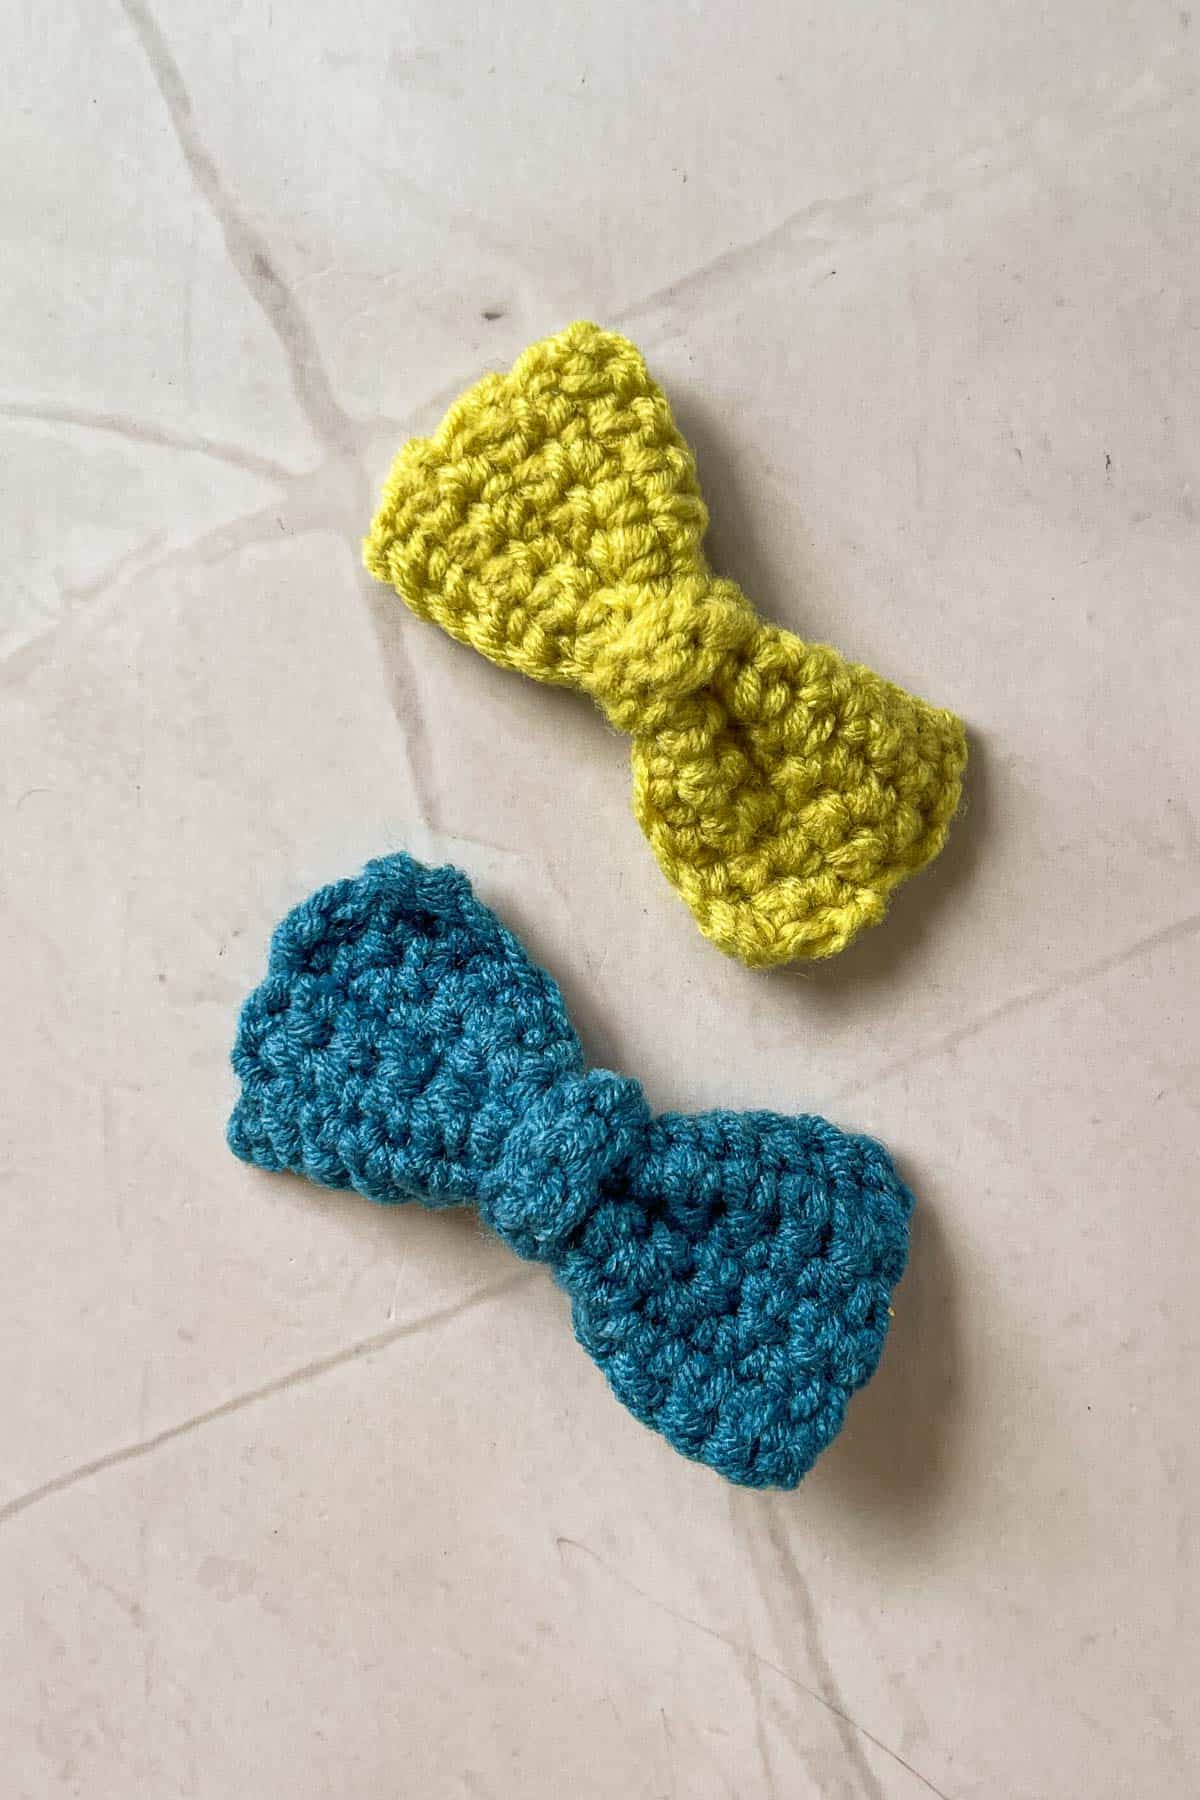 Blue and green crochet bows.